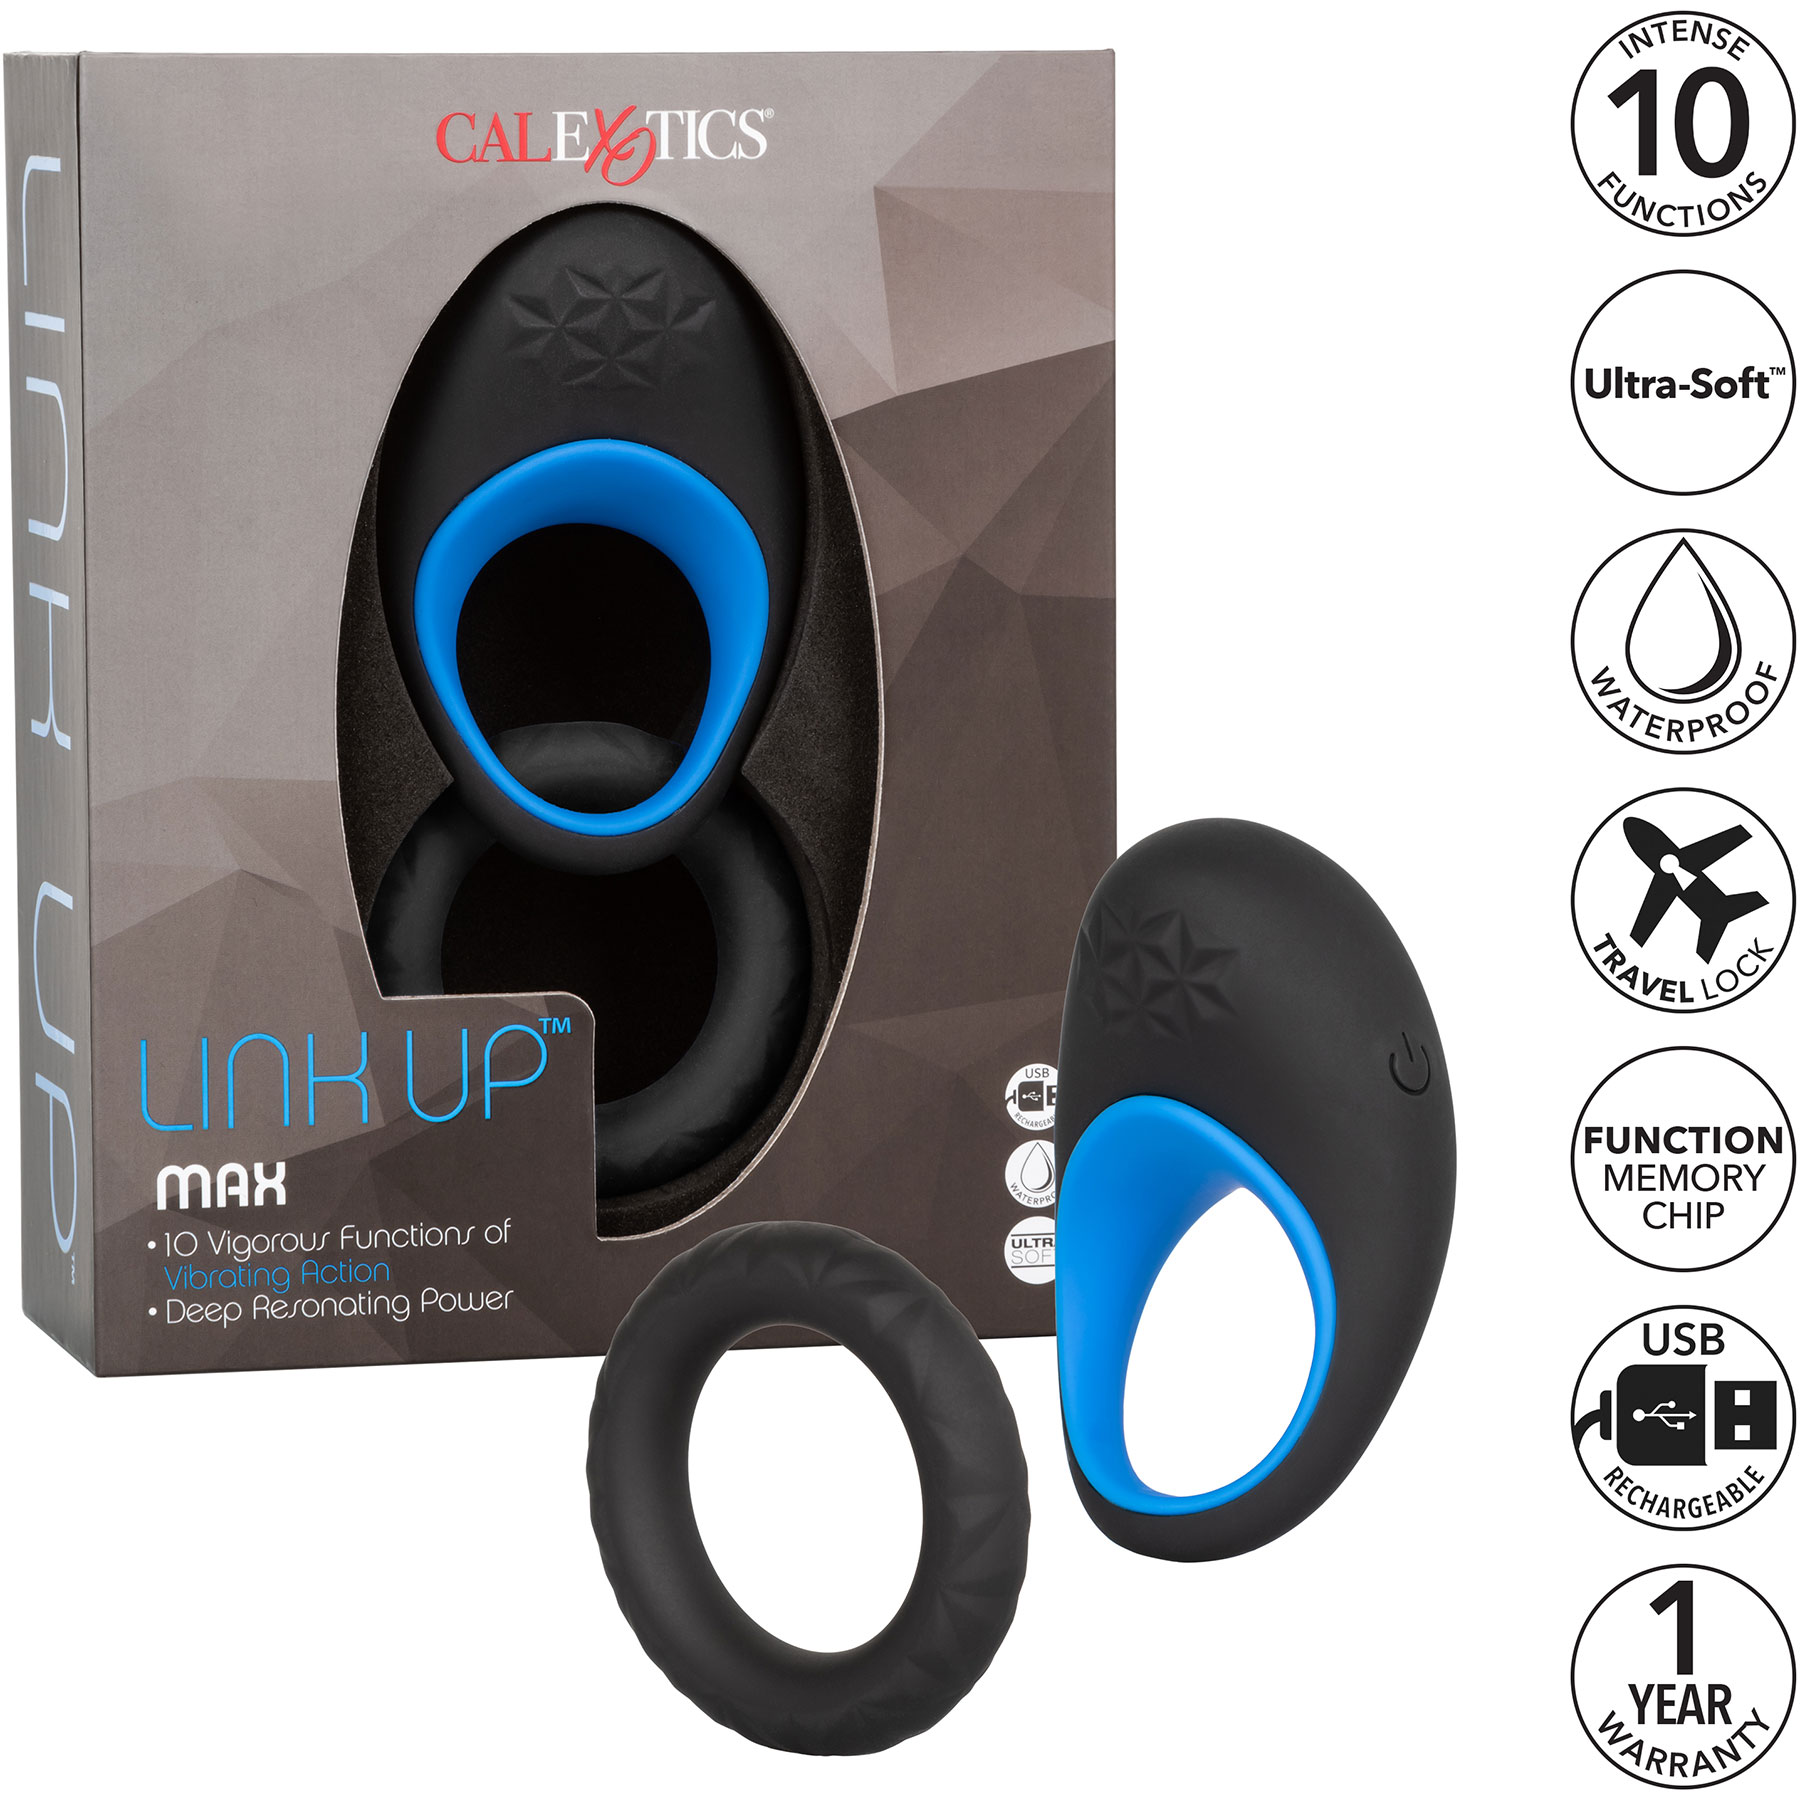 Link Up Max Silicone Rechargeable Vibrating Cock Ring - Box & Features